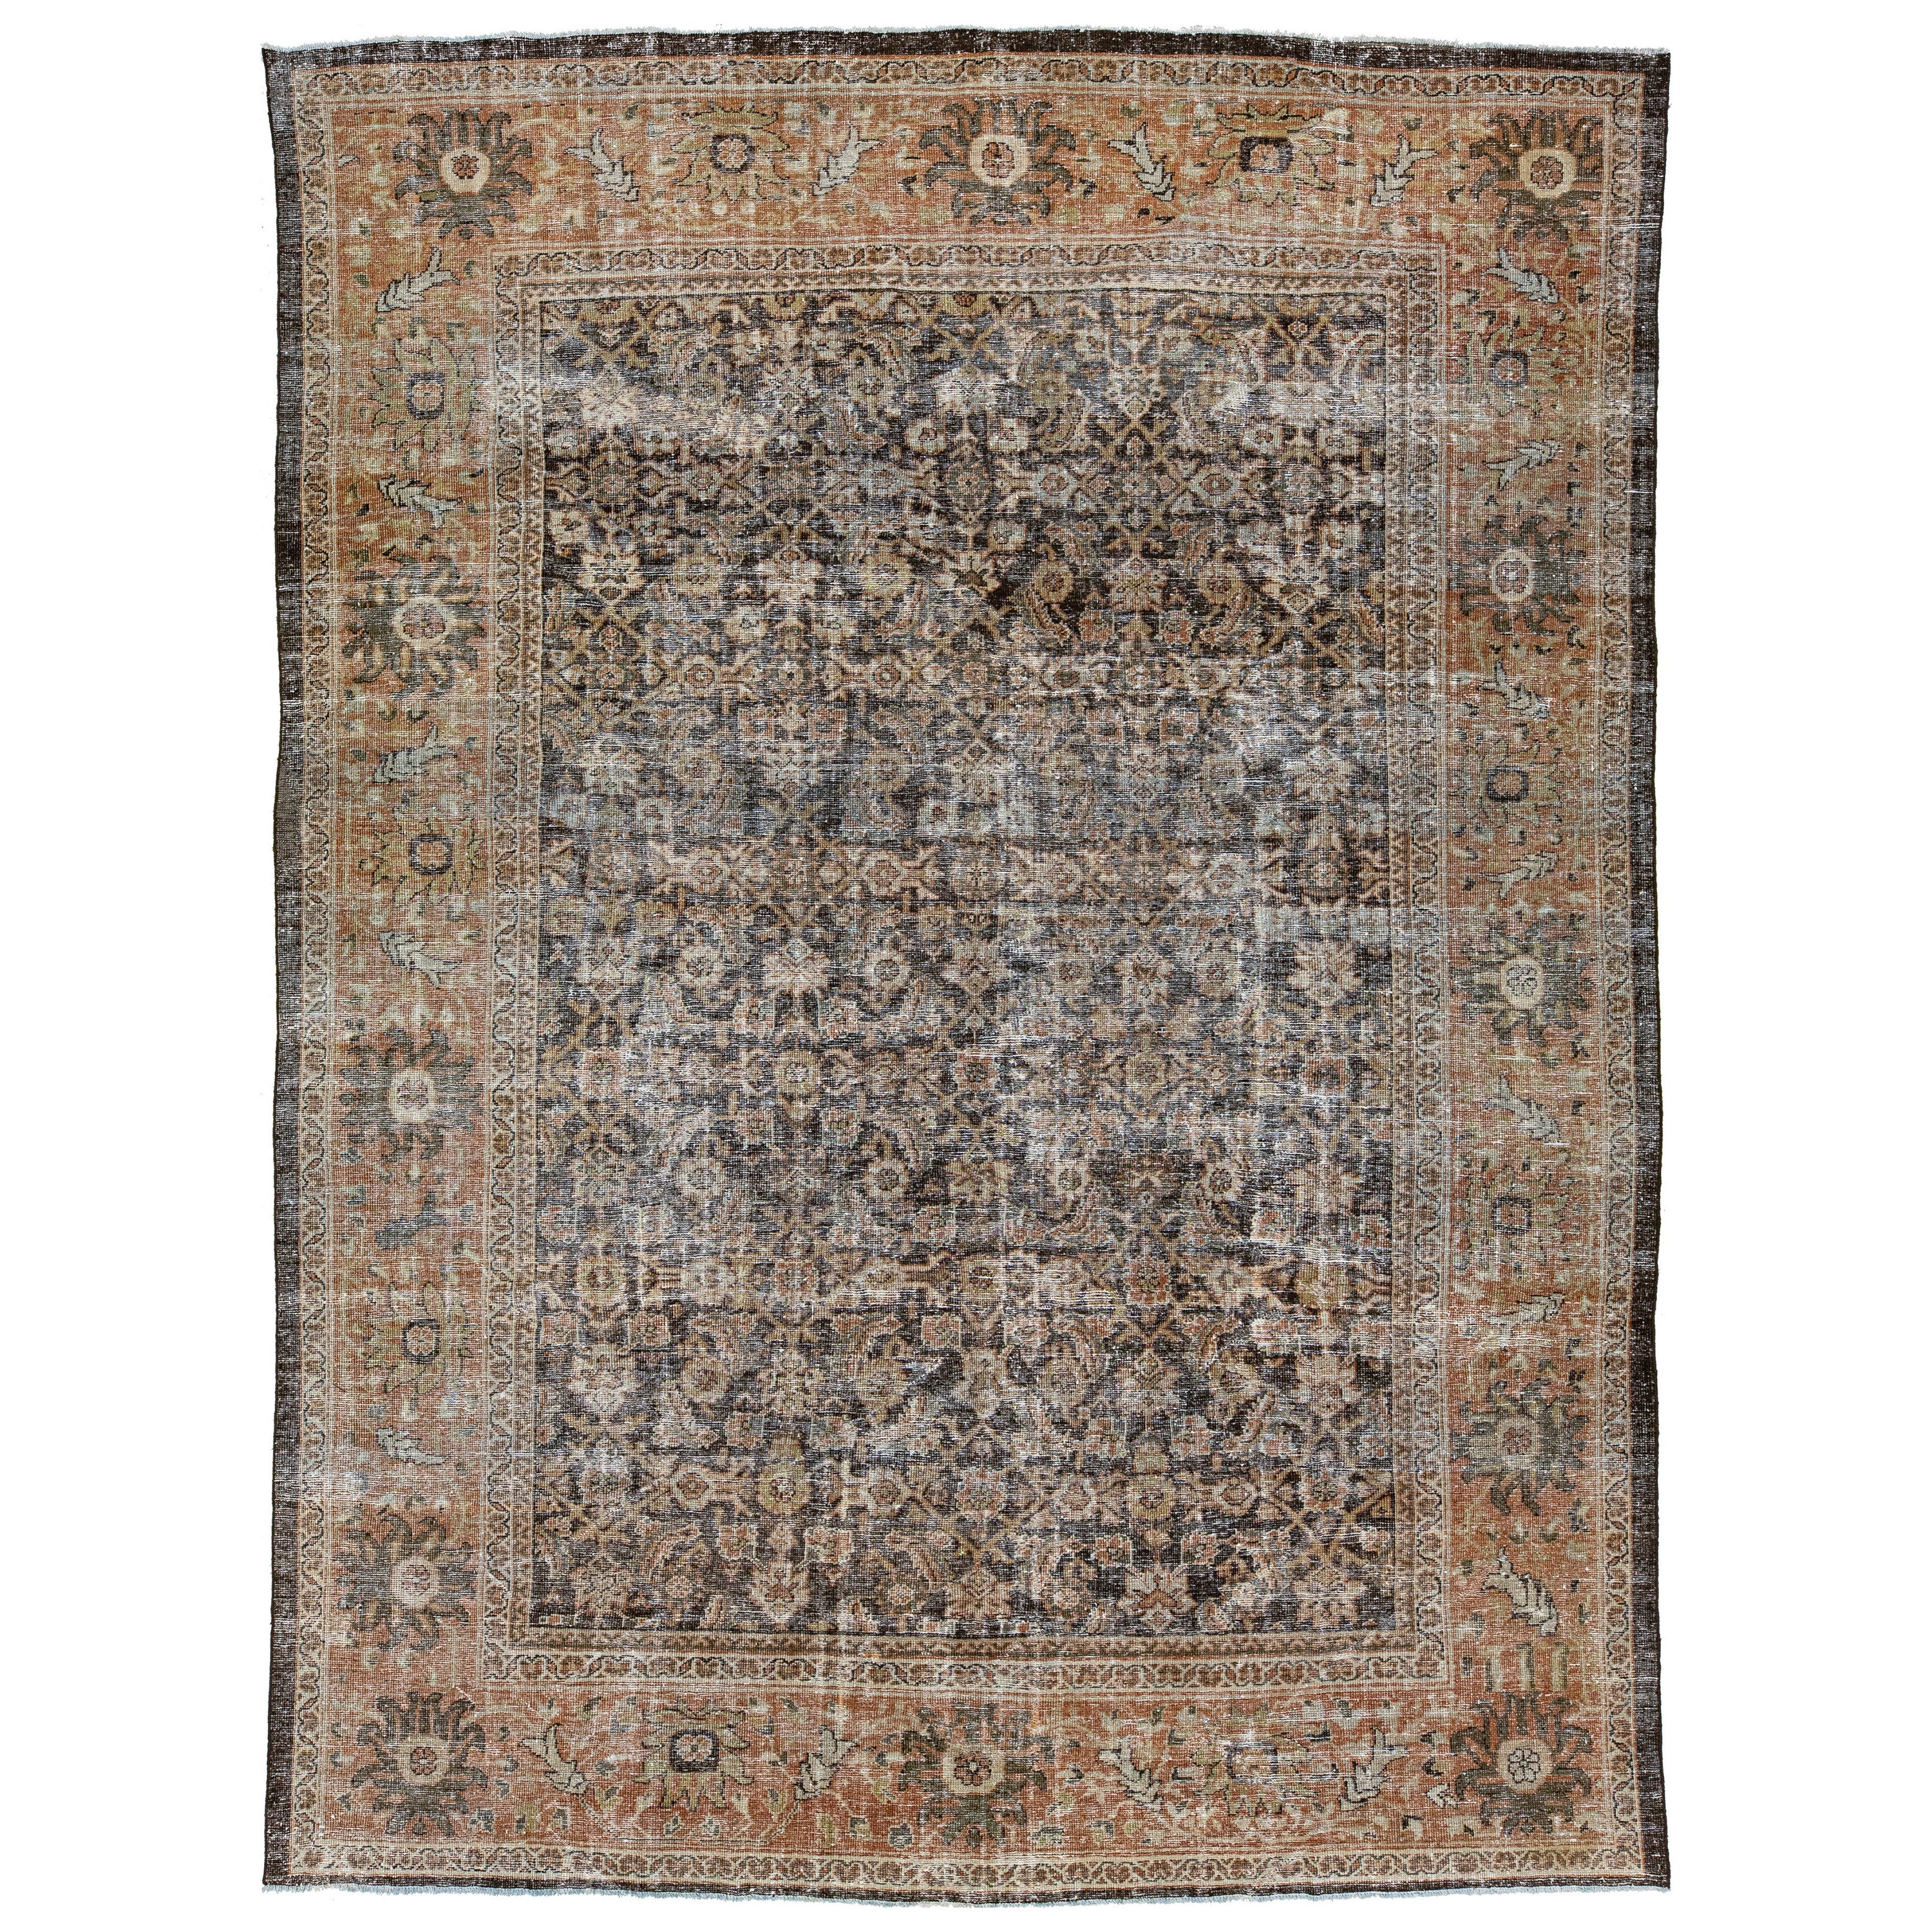 1900s Antique Persian Sultanabad Wool Rug In Brown With Allover Pattern